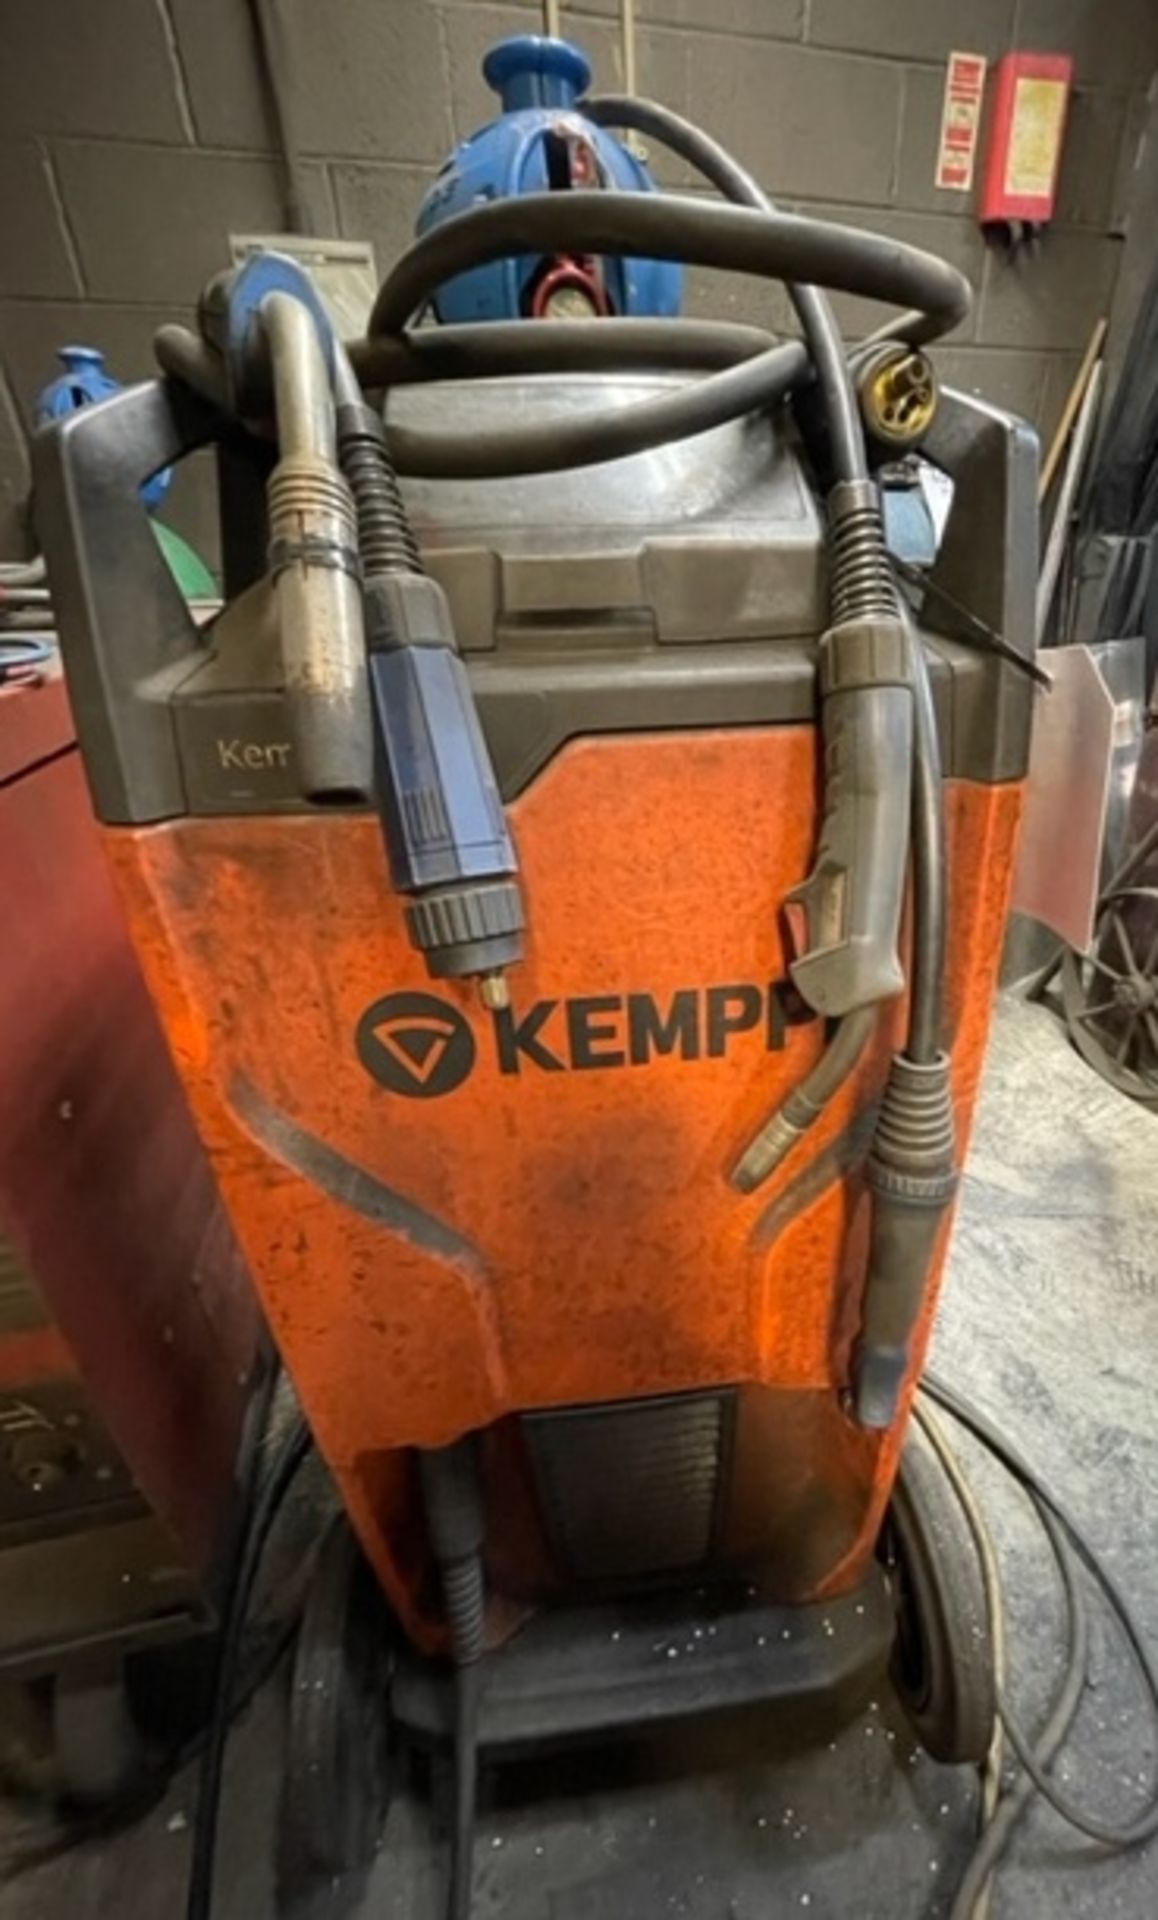 Kemppi Kempact 323R Mig Welder, Serial Number19994257 (Location Colchester. Please Refer to